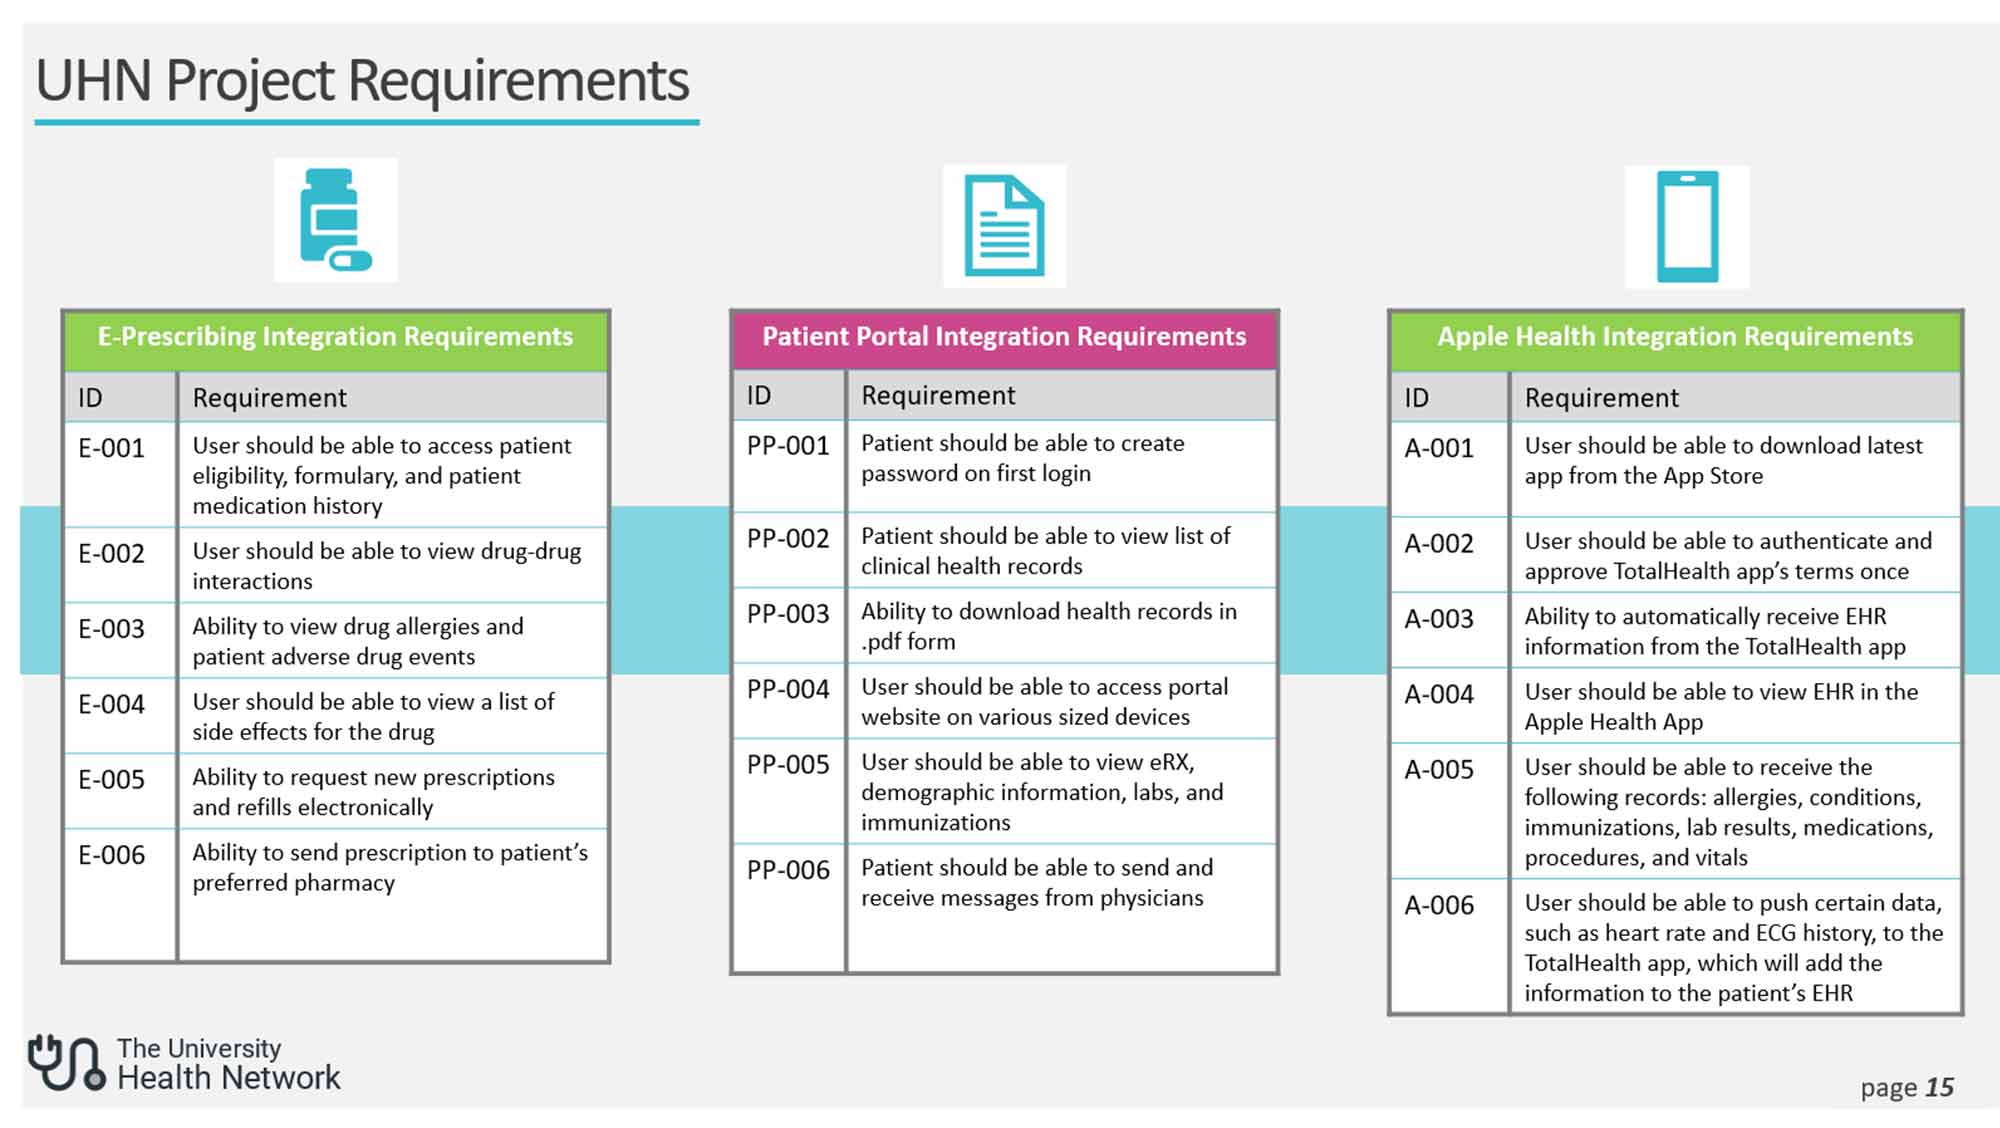 A project requirements slide from the presentation